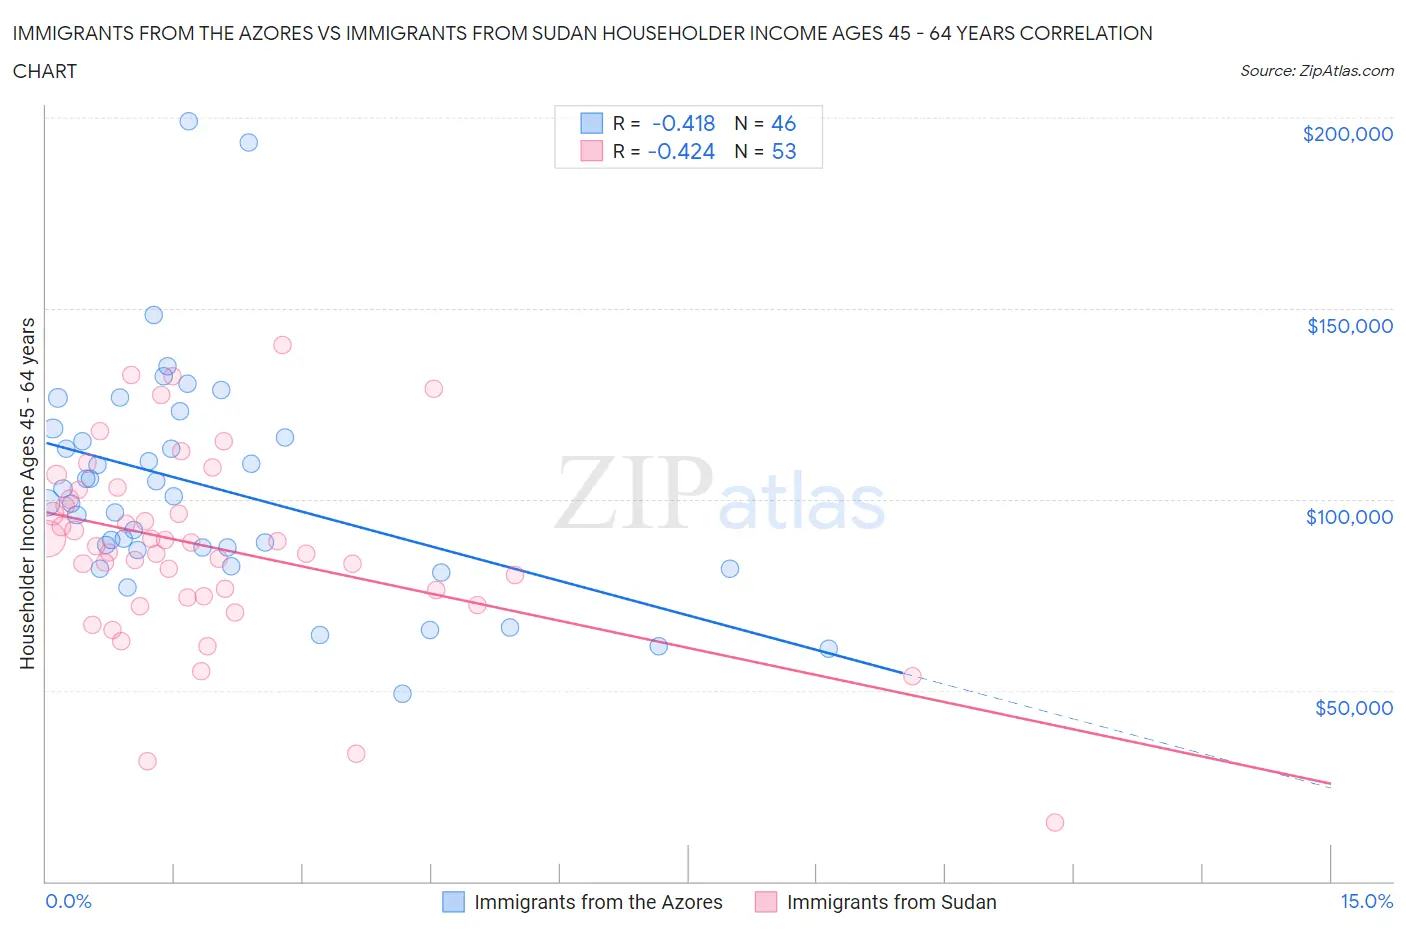 Immigrants from the Azores vs Immigrants from Sudan Householder Income Ages 45 - 64 years